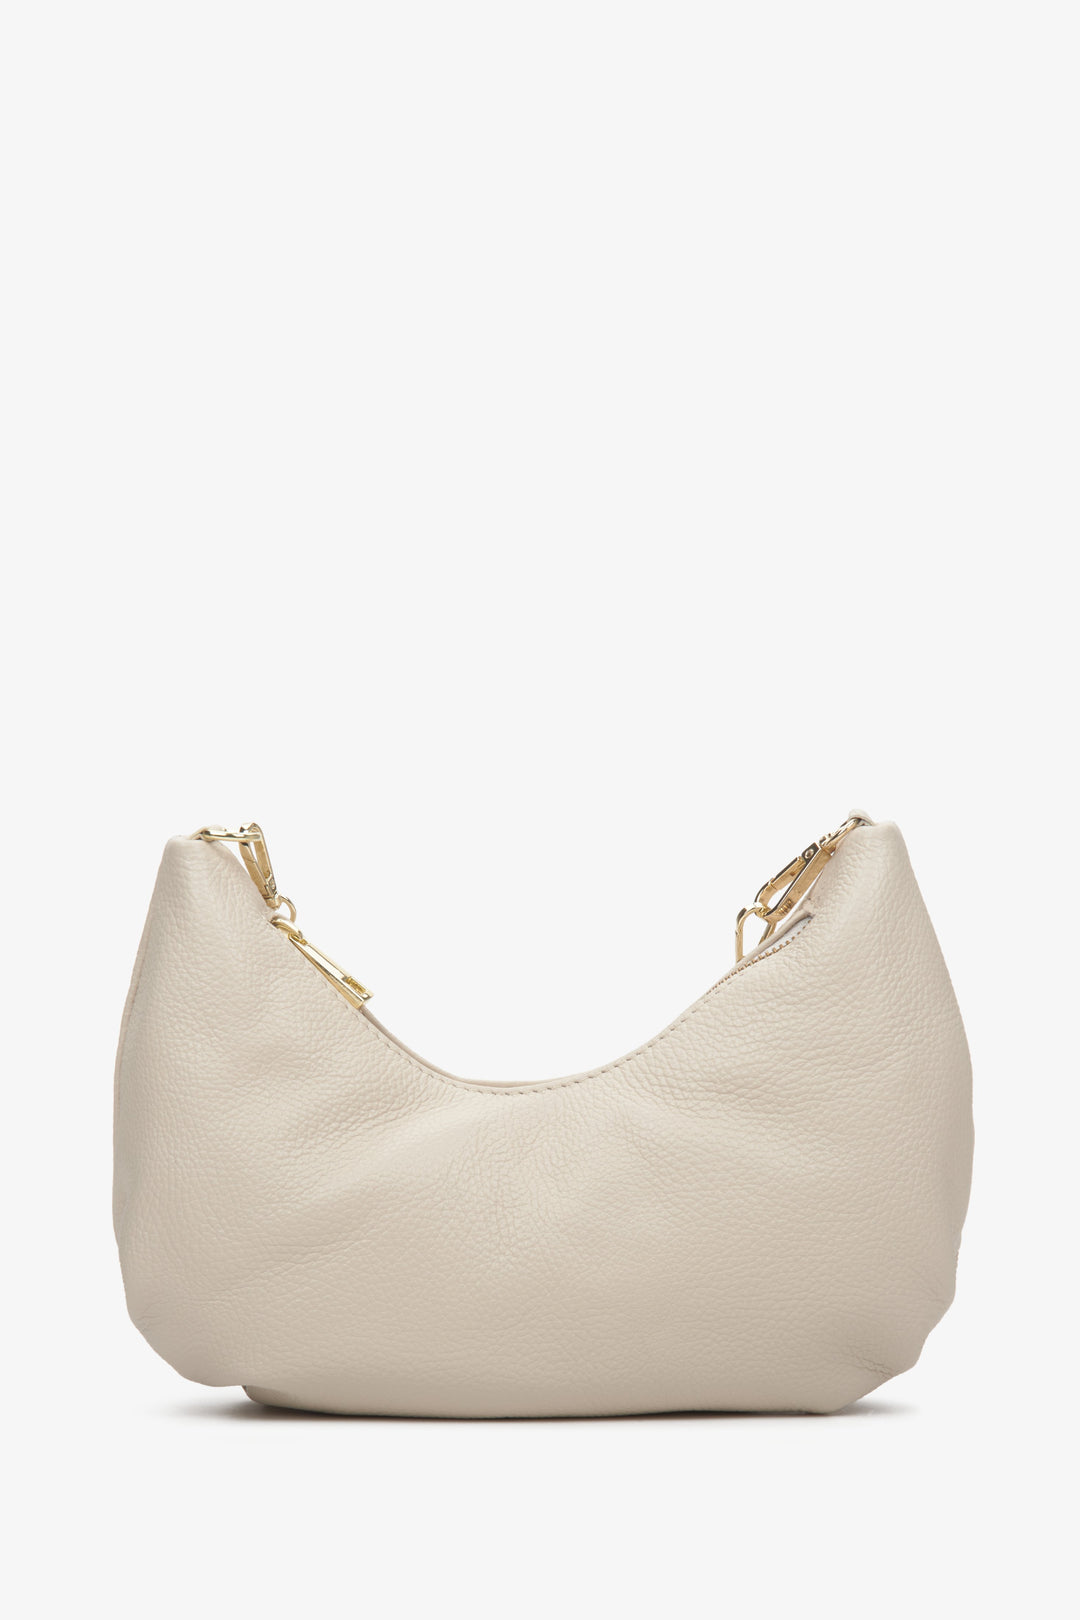 Women's light beige baguette handbag made of Italian genuine leather with a golden chain.